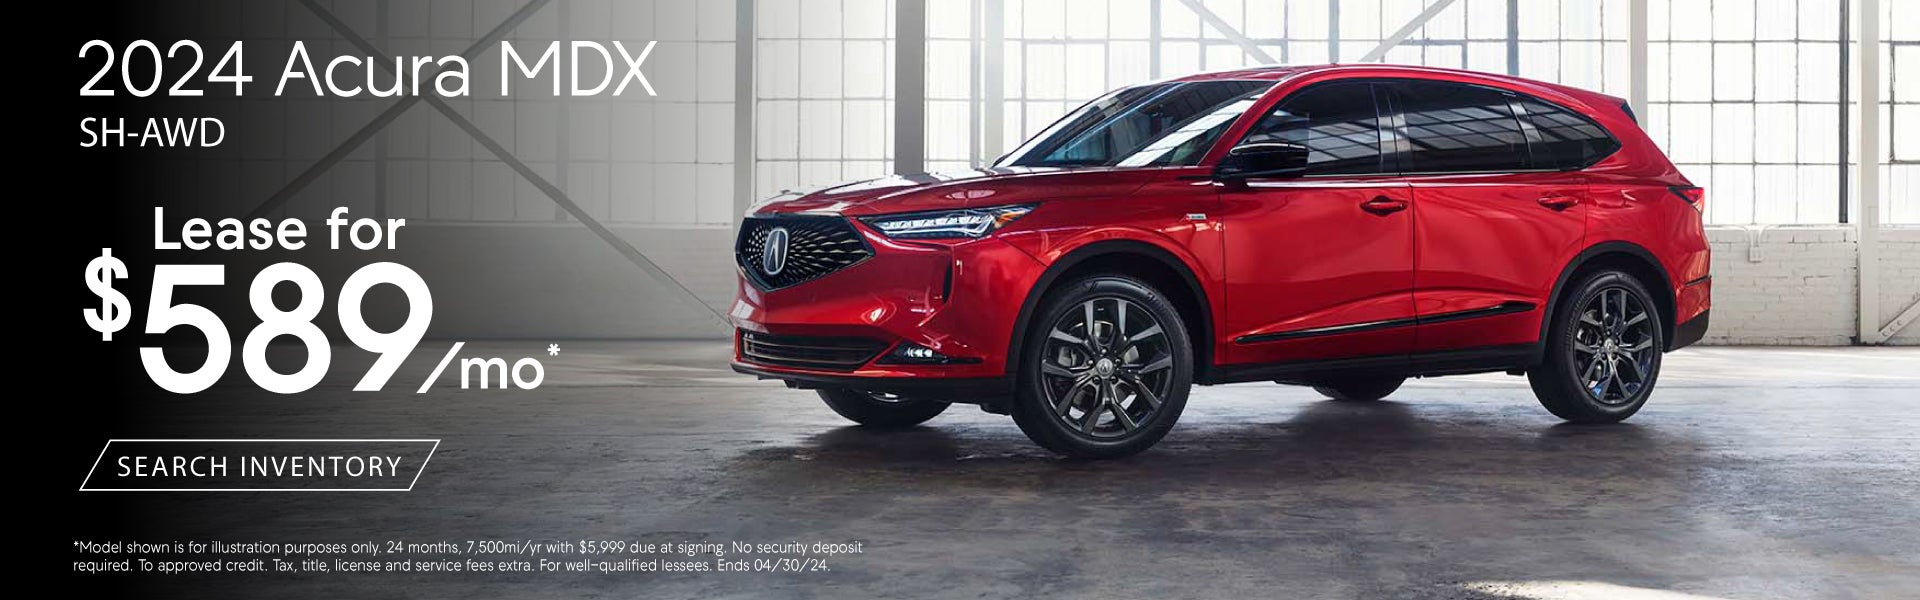 2024 Acura MDX Lease Offer